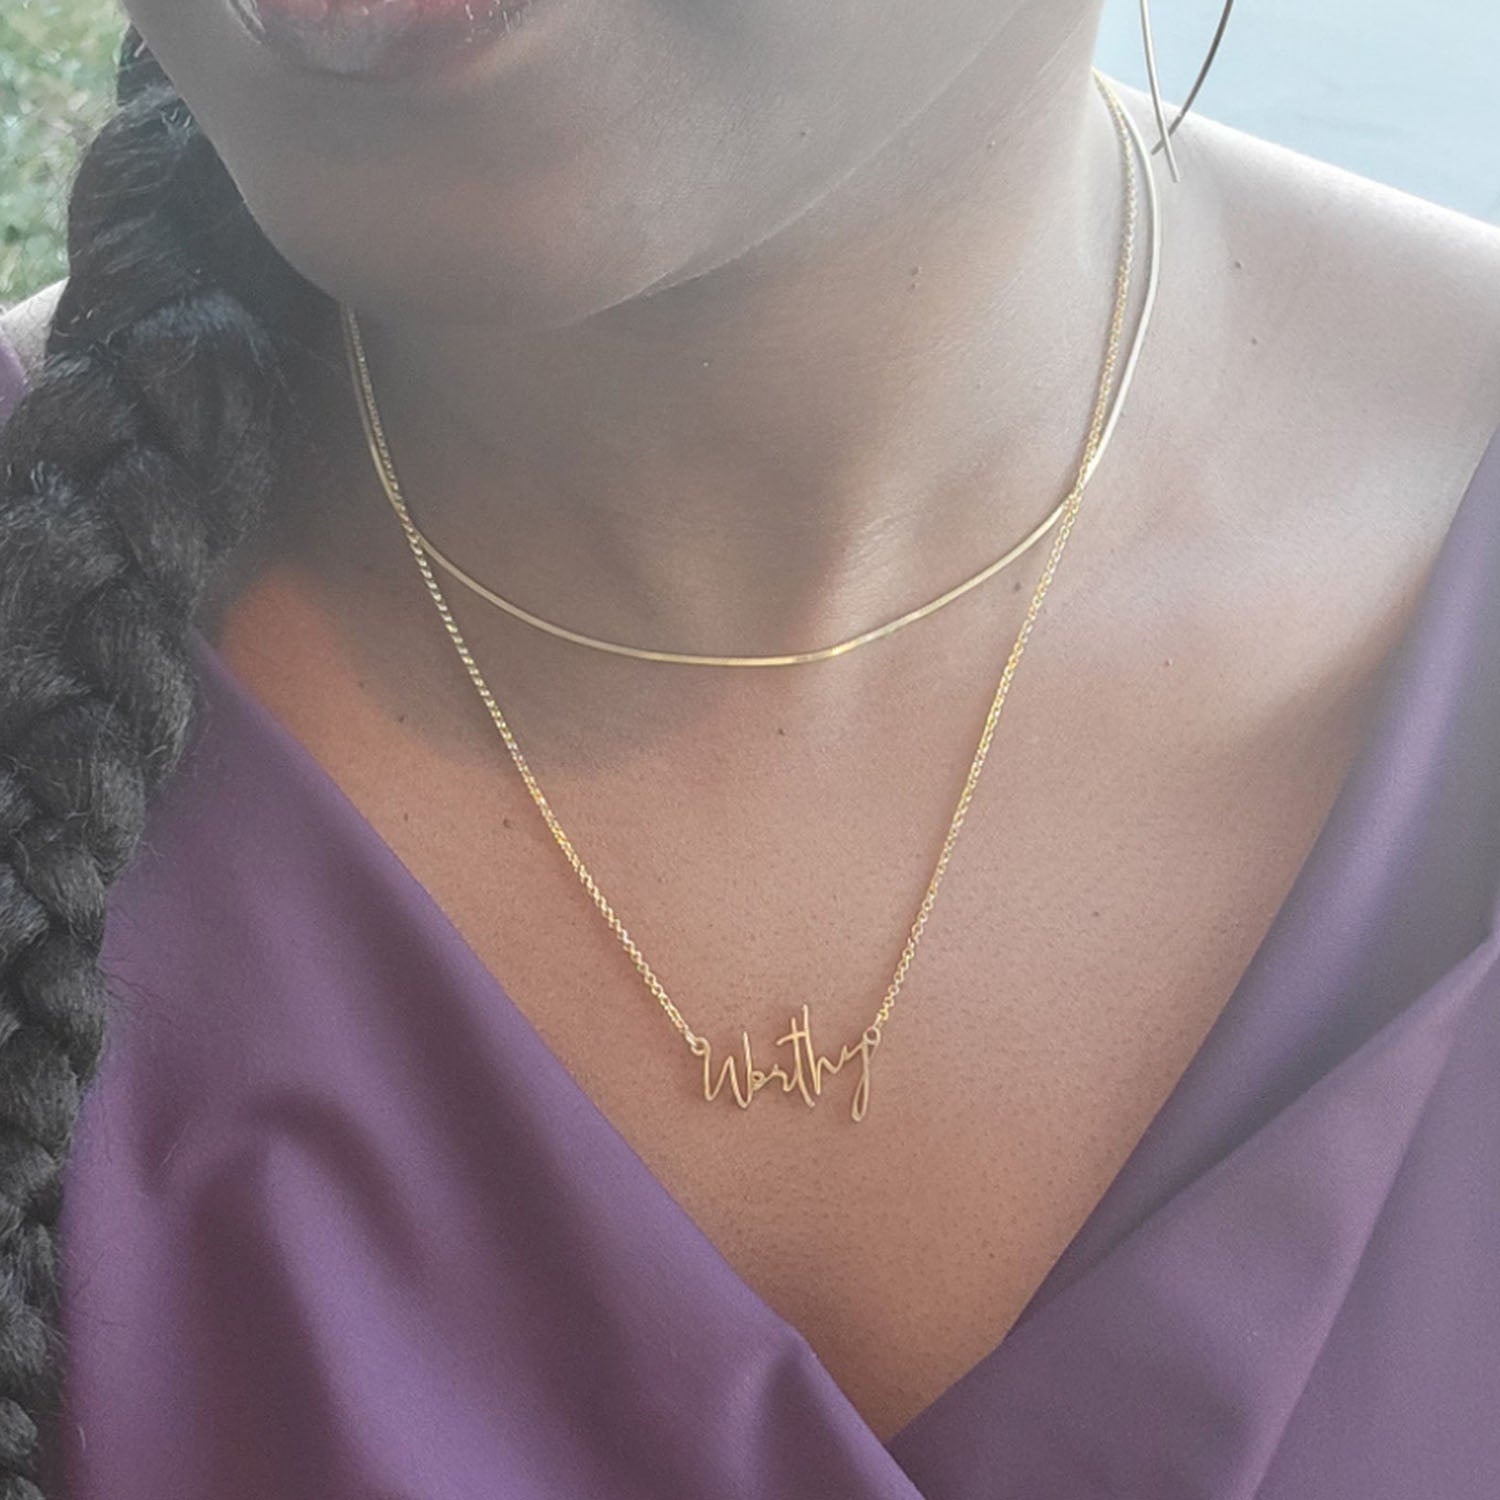 Worthy Affirmation Necklace in Gold